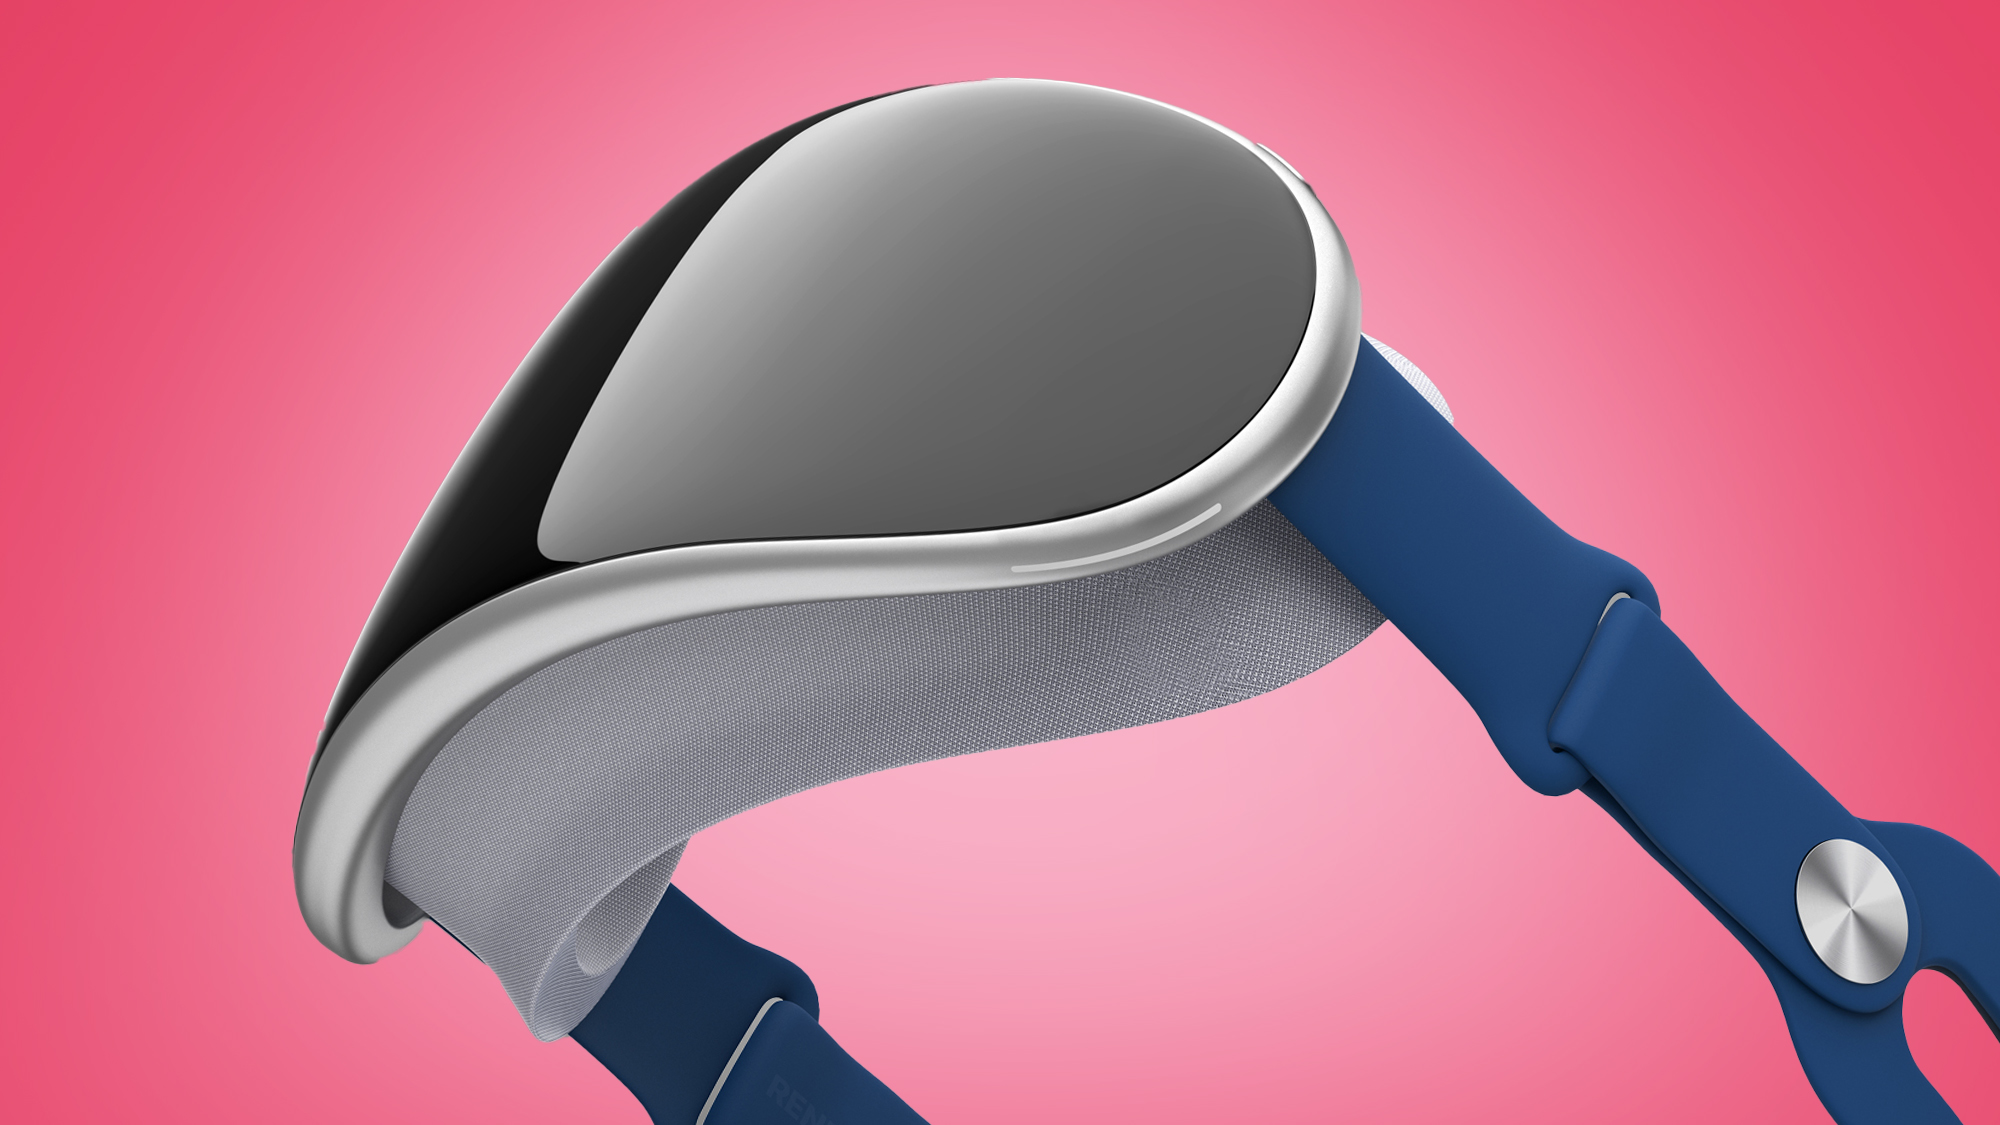 render of the rumored Apple VR headset on a pink background